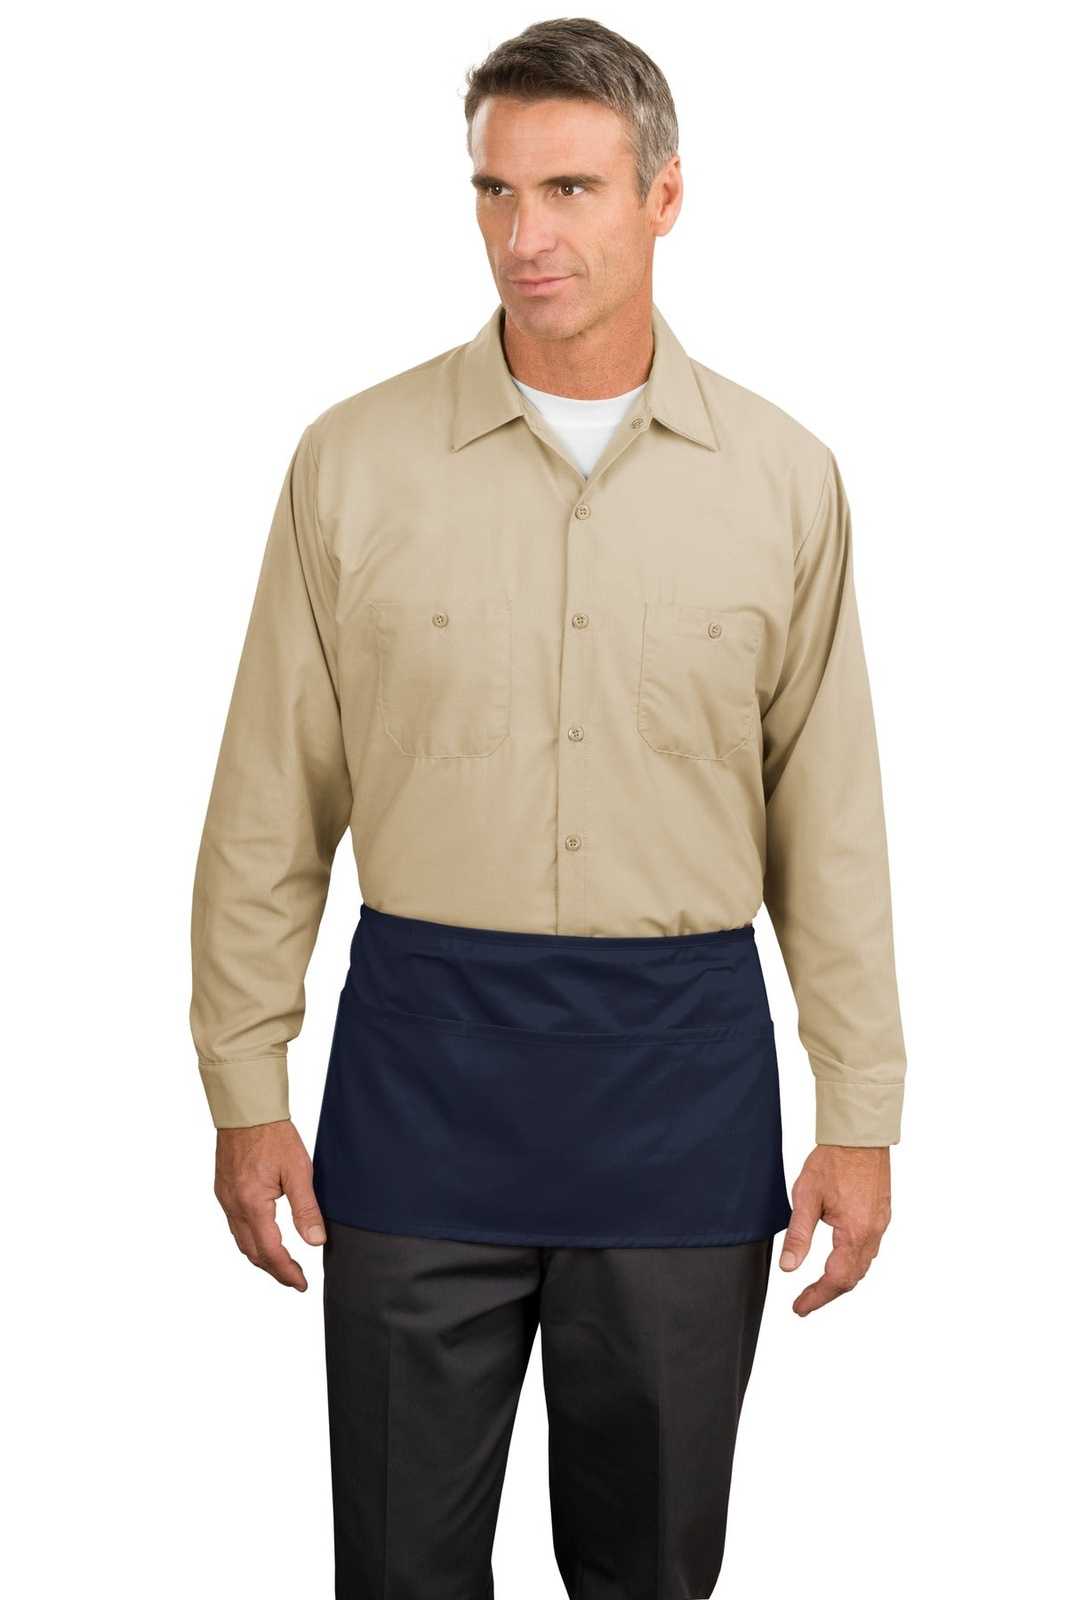 Port Authority A515 Waist Apron with Pockets - Navy - HIT a Double - 1